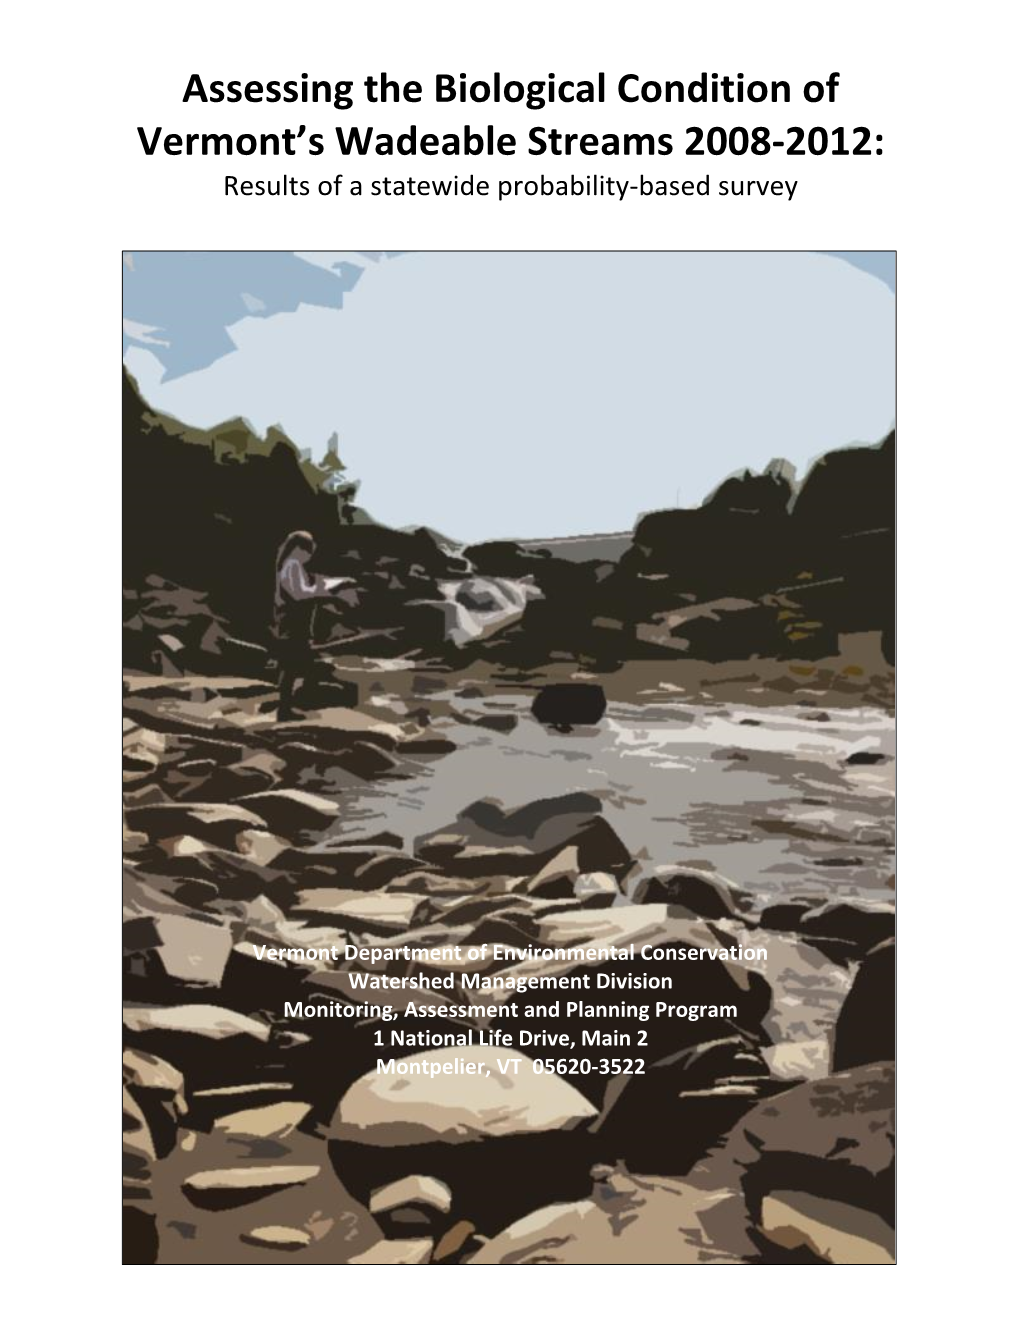 Assessing the Biological Condition of Vermont's Wadeable Streams 2008